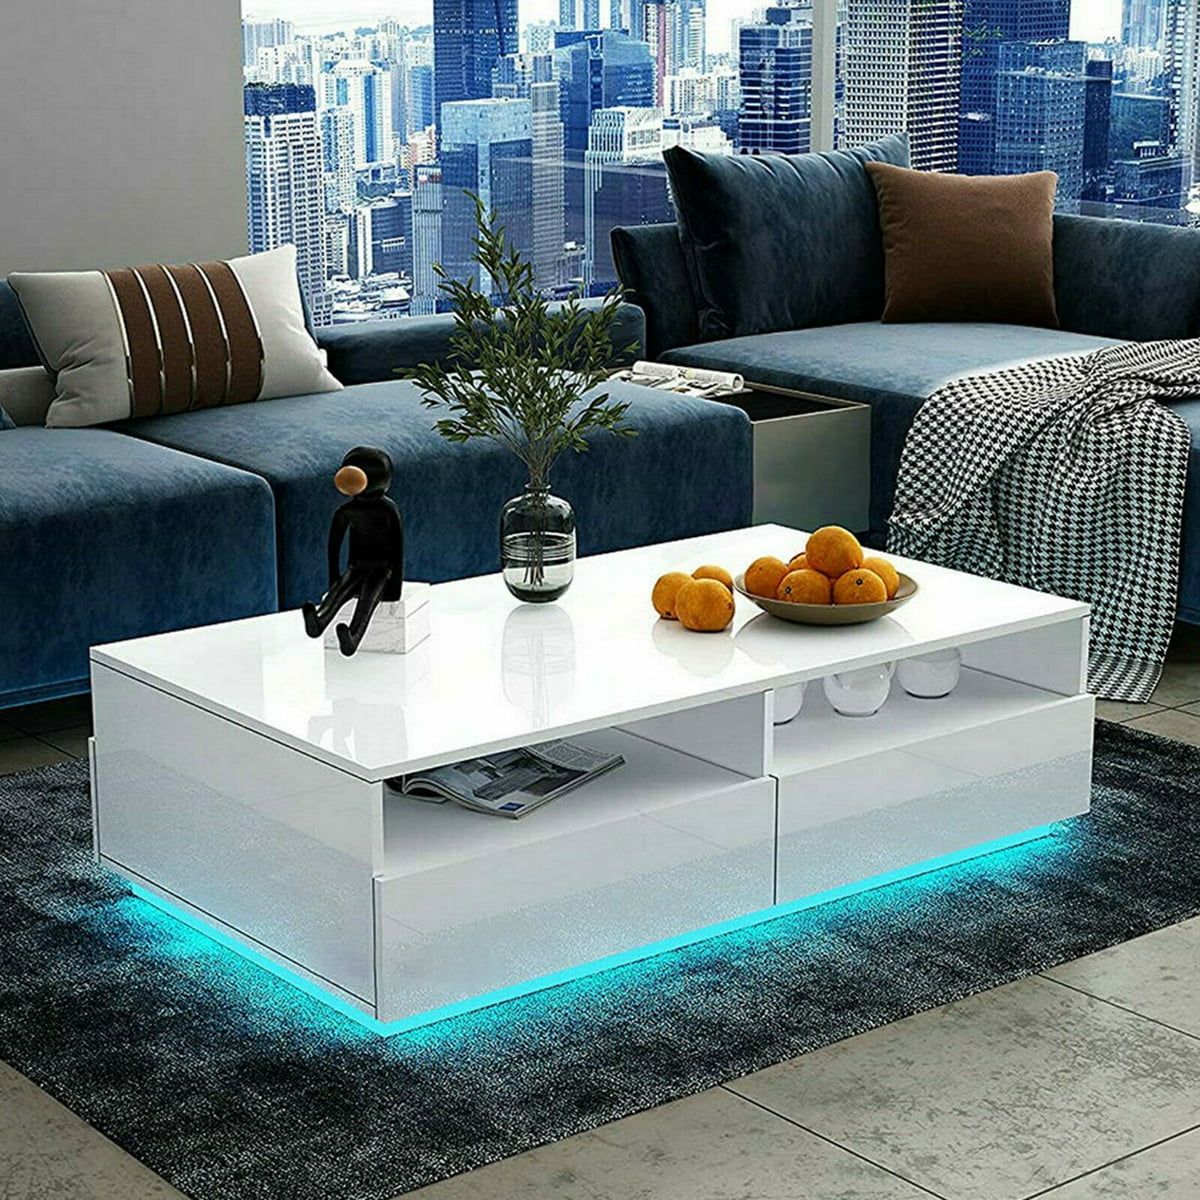 Hommpa Led Coffee Table Rectangular High Gloss India | Ubuy Pertaining To Led Coffee Tables With 4 Drawers (View 7 of 15)